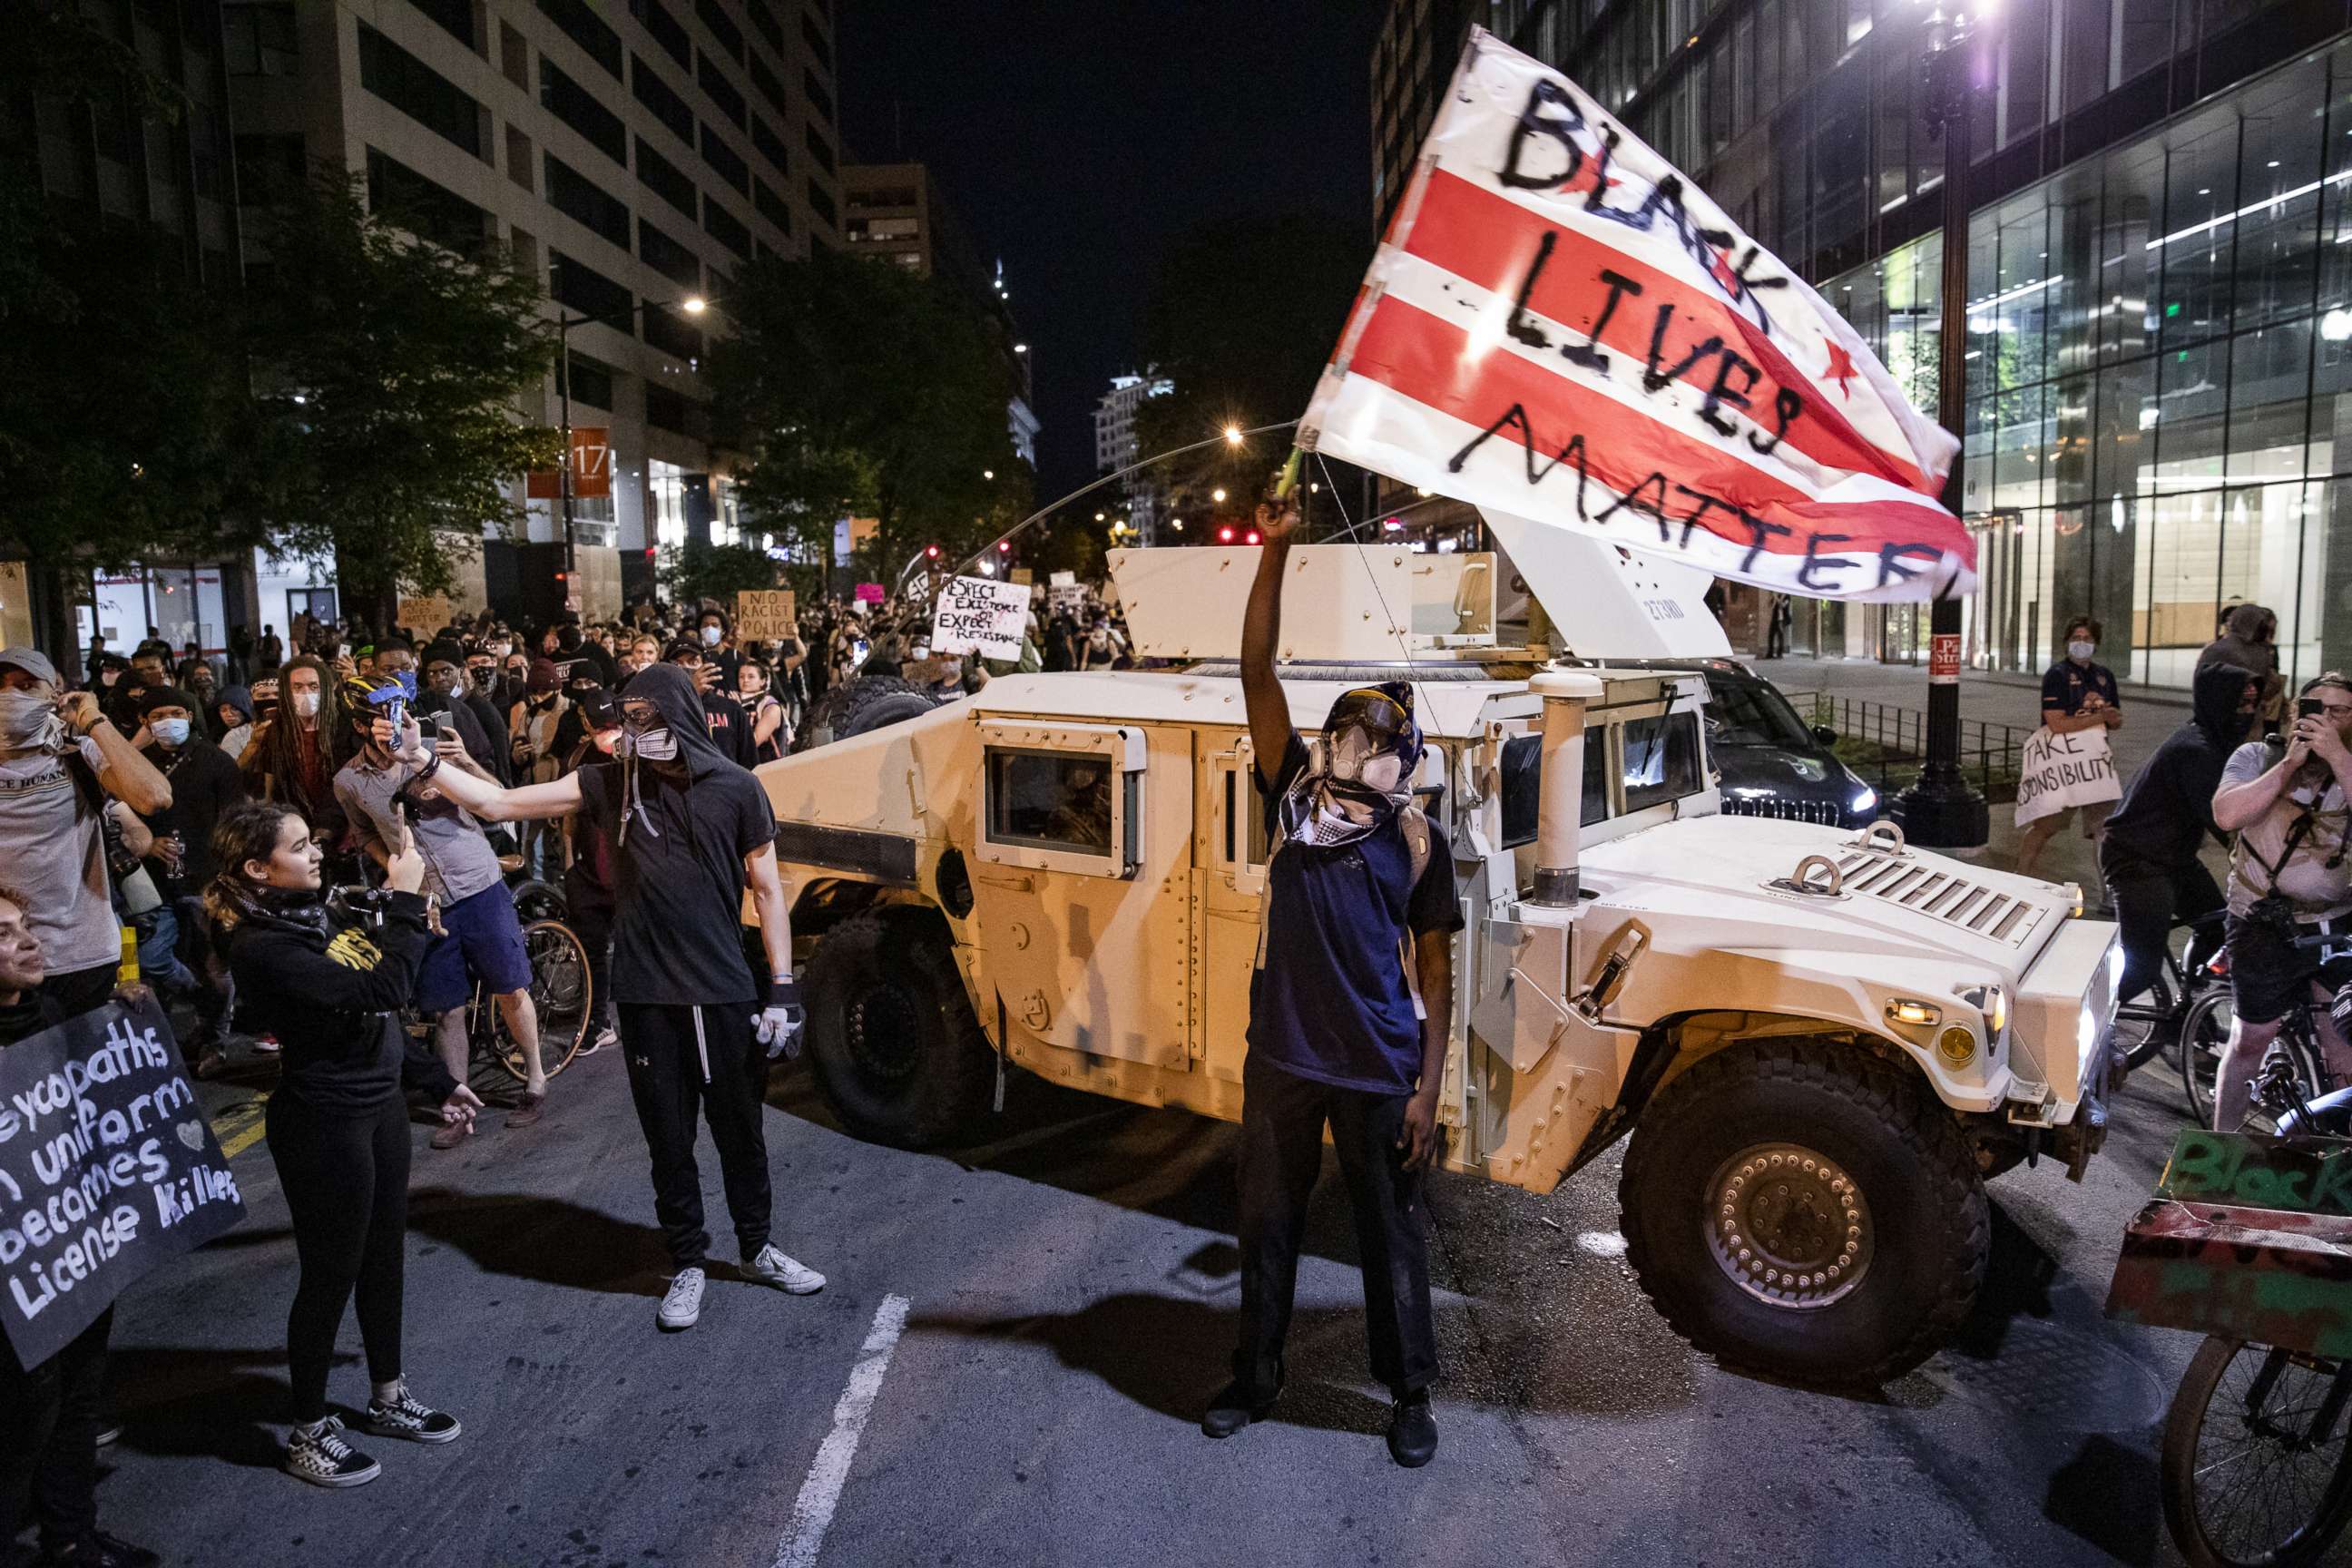 PHOTO: A protester waves a D.C. flag with Black Lives Matter spray painted on it next to a DC National Guard Humvee as people march through the streets during a demonstration over the death of George Floyd, June 2, 2020, in Washington, D.C.